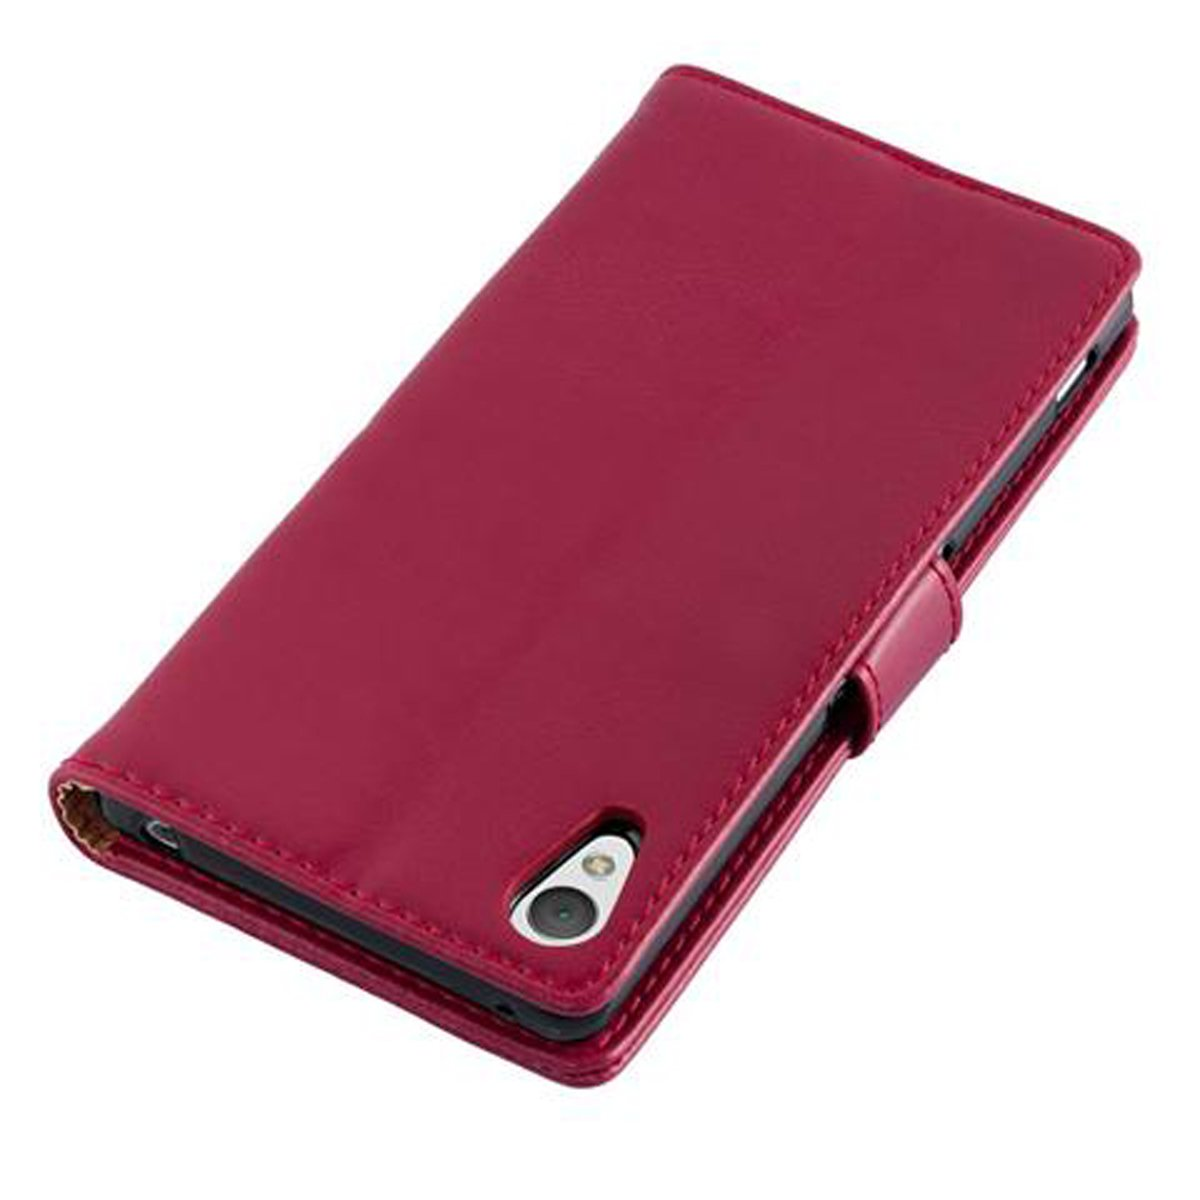 CADORABO Hülle Luxury Book Style, Sony, Bookcover, / Z3 Z4, ROT PLUS WEIN Xperia